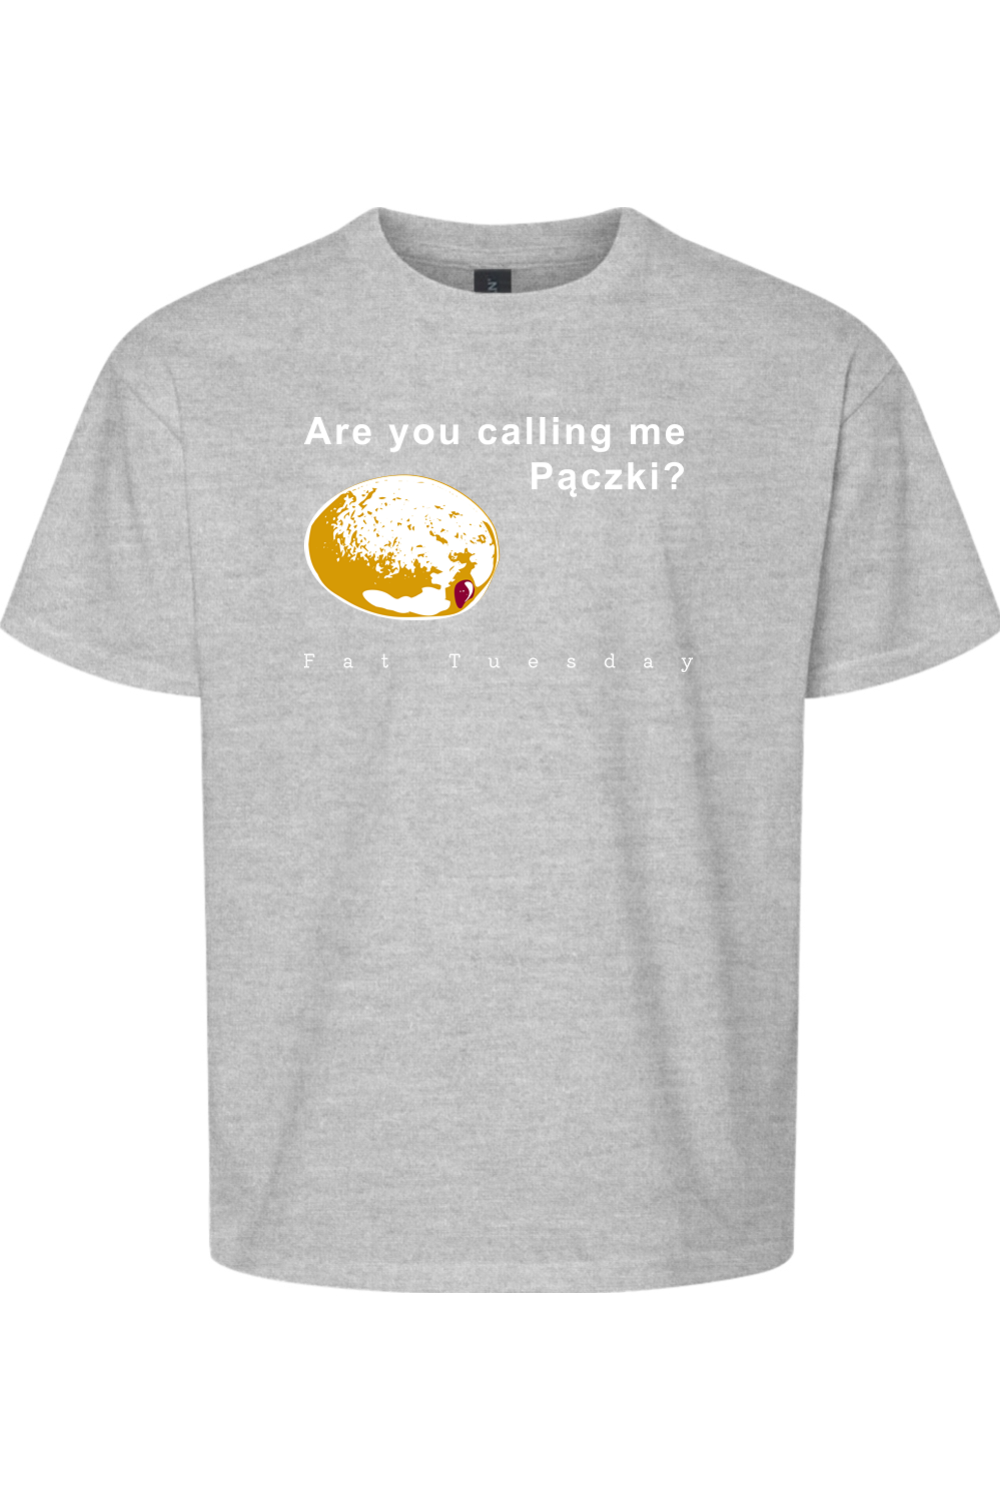 Are you calling me Pączki? - T-Shirt - youth